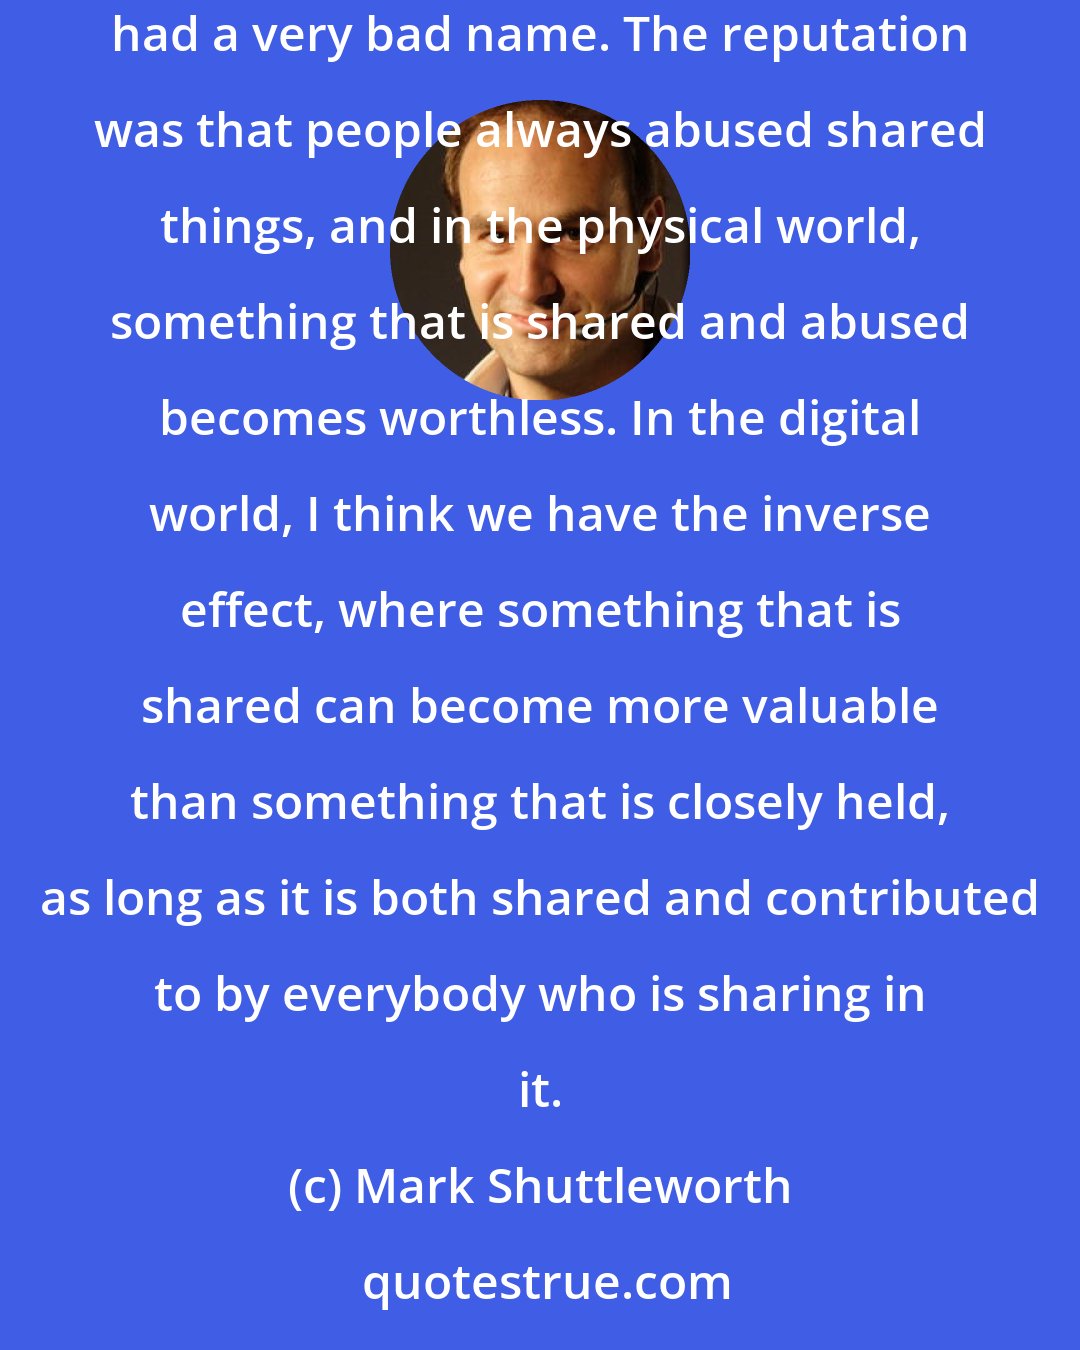 Mark Shuttleworth: Free software is part of a broader phenomenon, which is a shift toward recognizing the value of shared work. Historically, shared stuff had a very bad name. The reputation was that people always abused shared things, and in the physical world, something that is shared and abused becomes worthless. In the digital world, I think we have the inverse effect, where something that is shared can become more valuable than something that is closely held, as long as it is both shared and contributed to by everybody who is sharing in it.